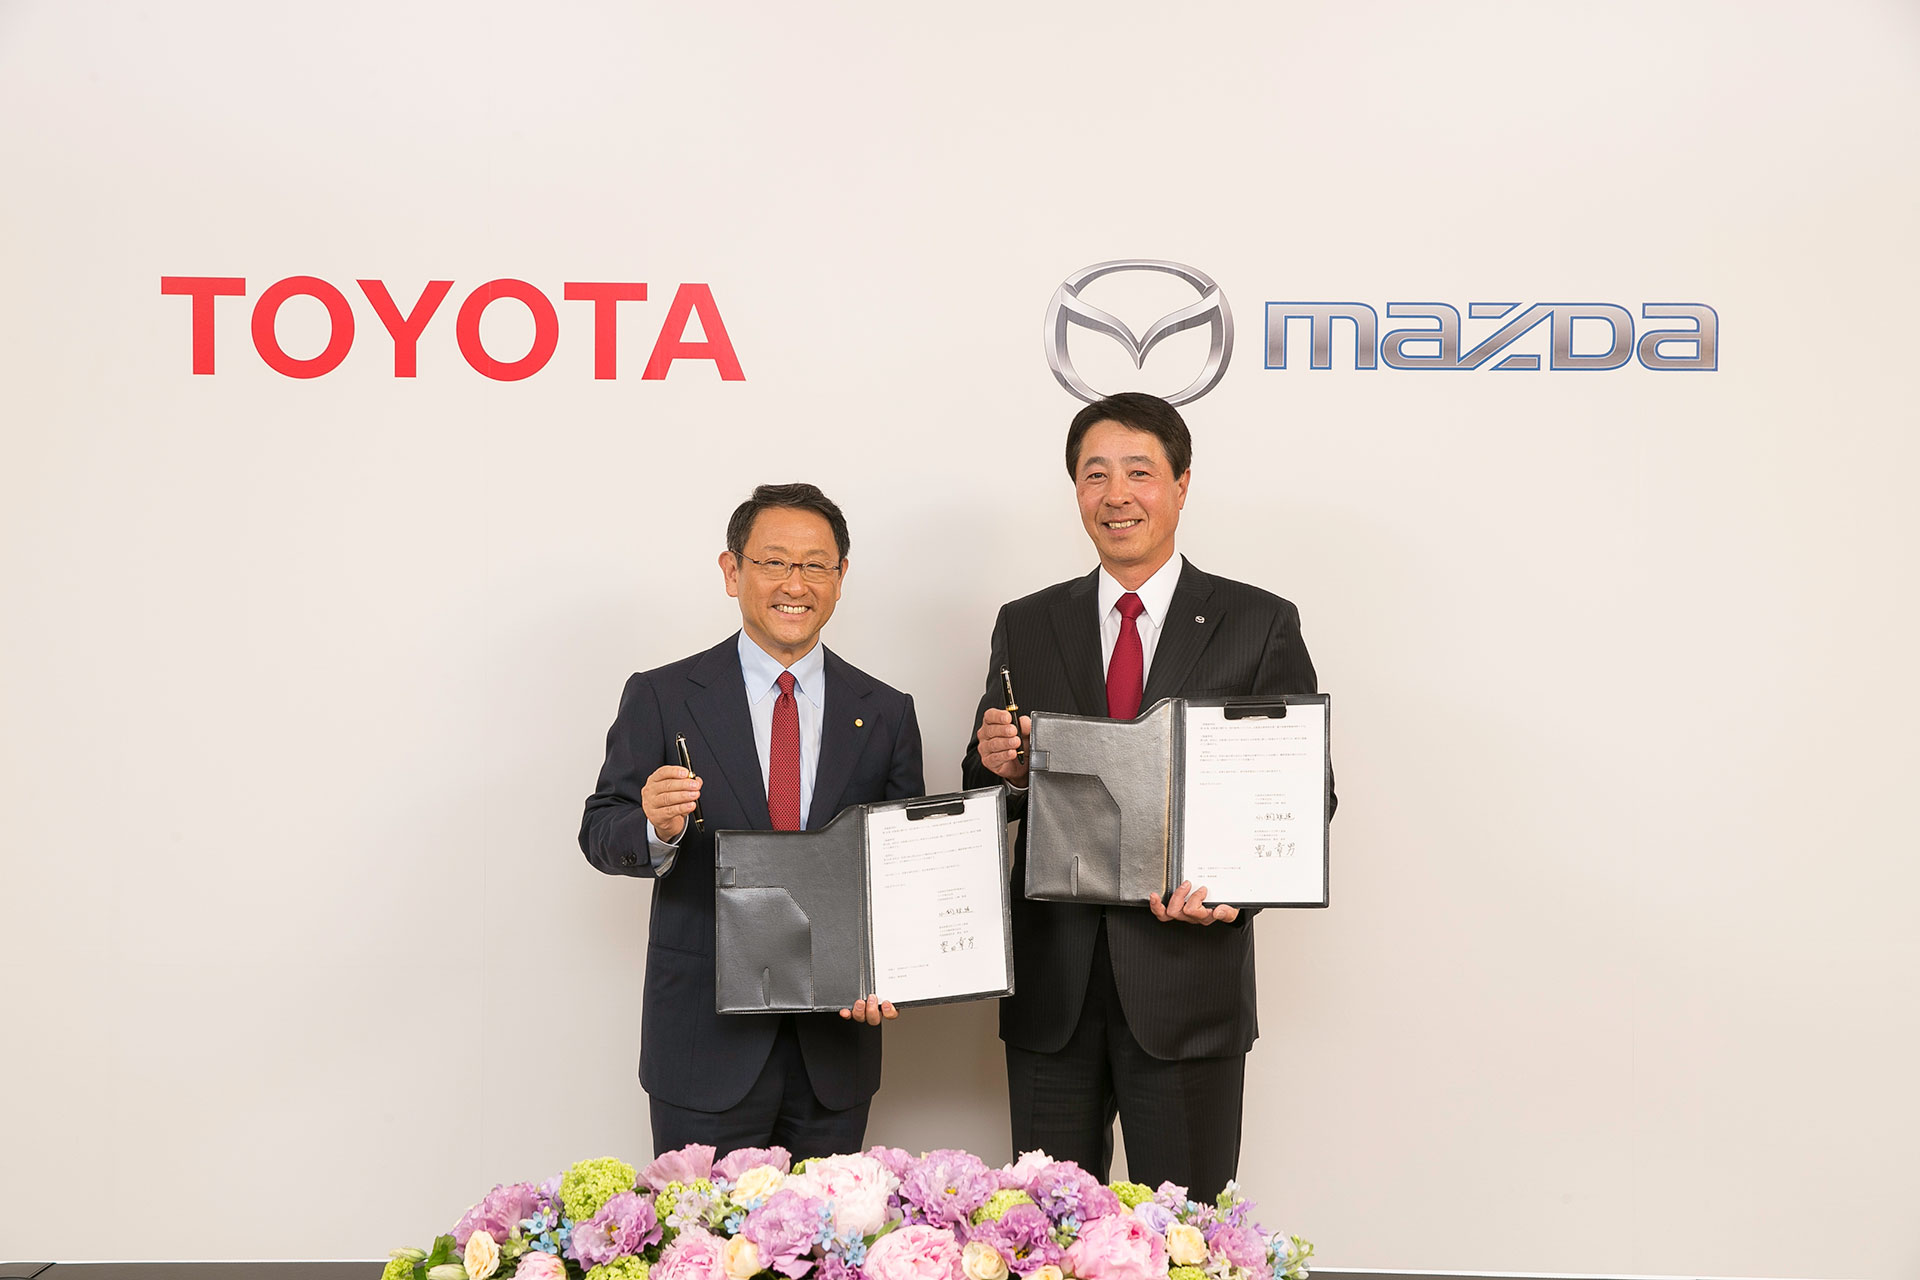 Signing of partnership agreement between Mazda and Toyota. Left: Toyota President and CEO Akio Toyoda, right: Mazda President and CEO Masamichi Kogai